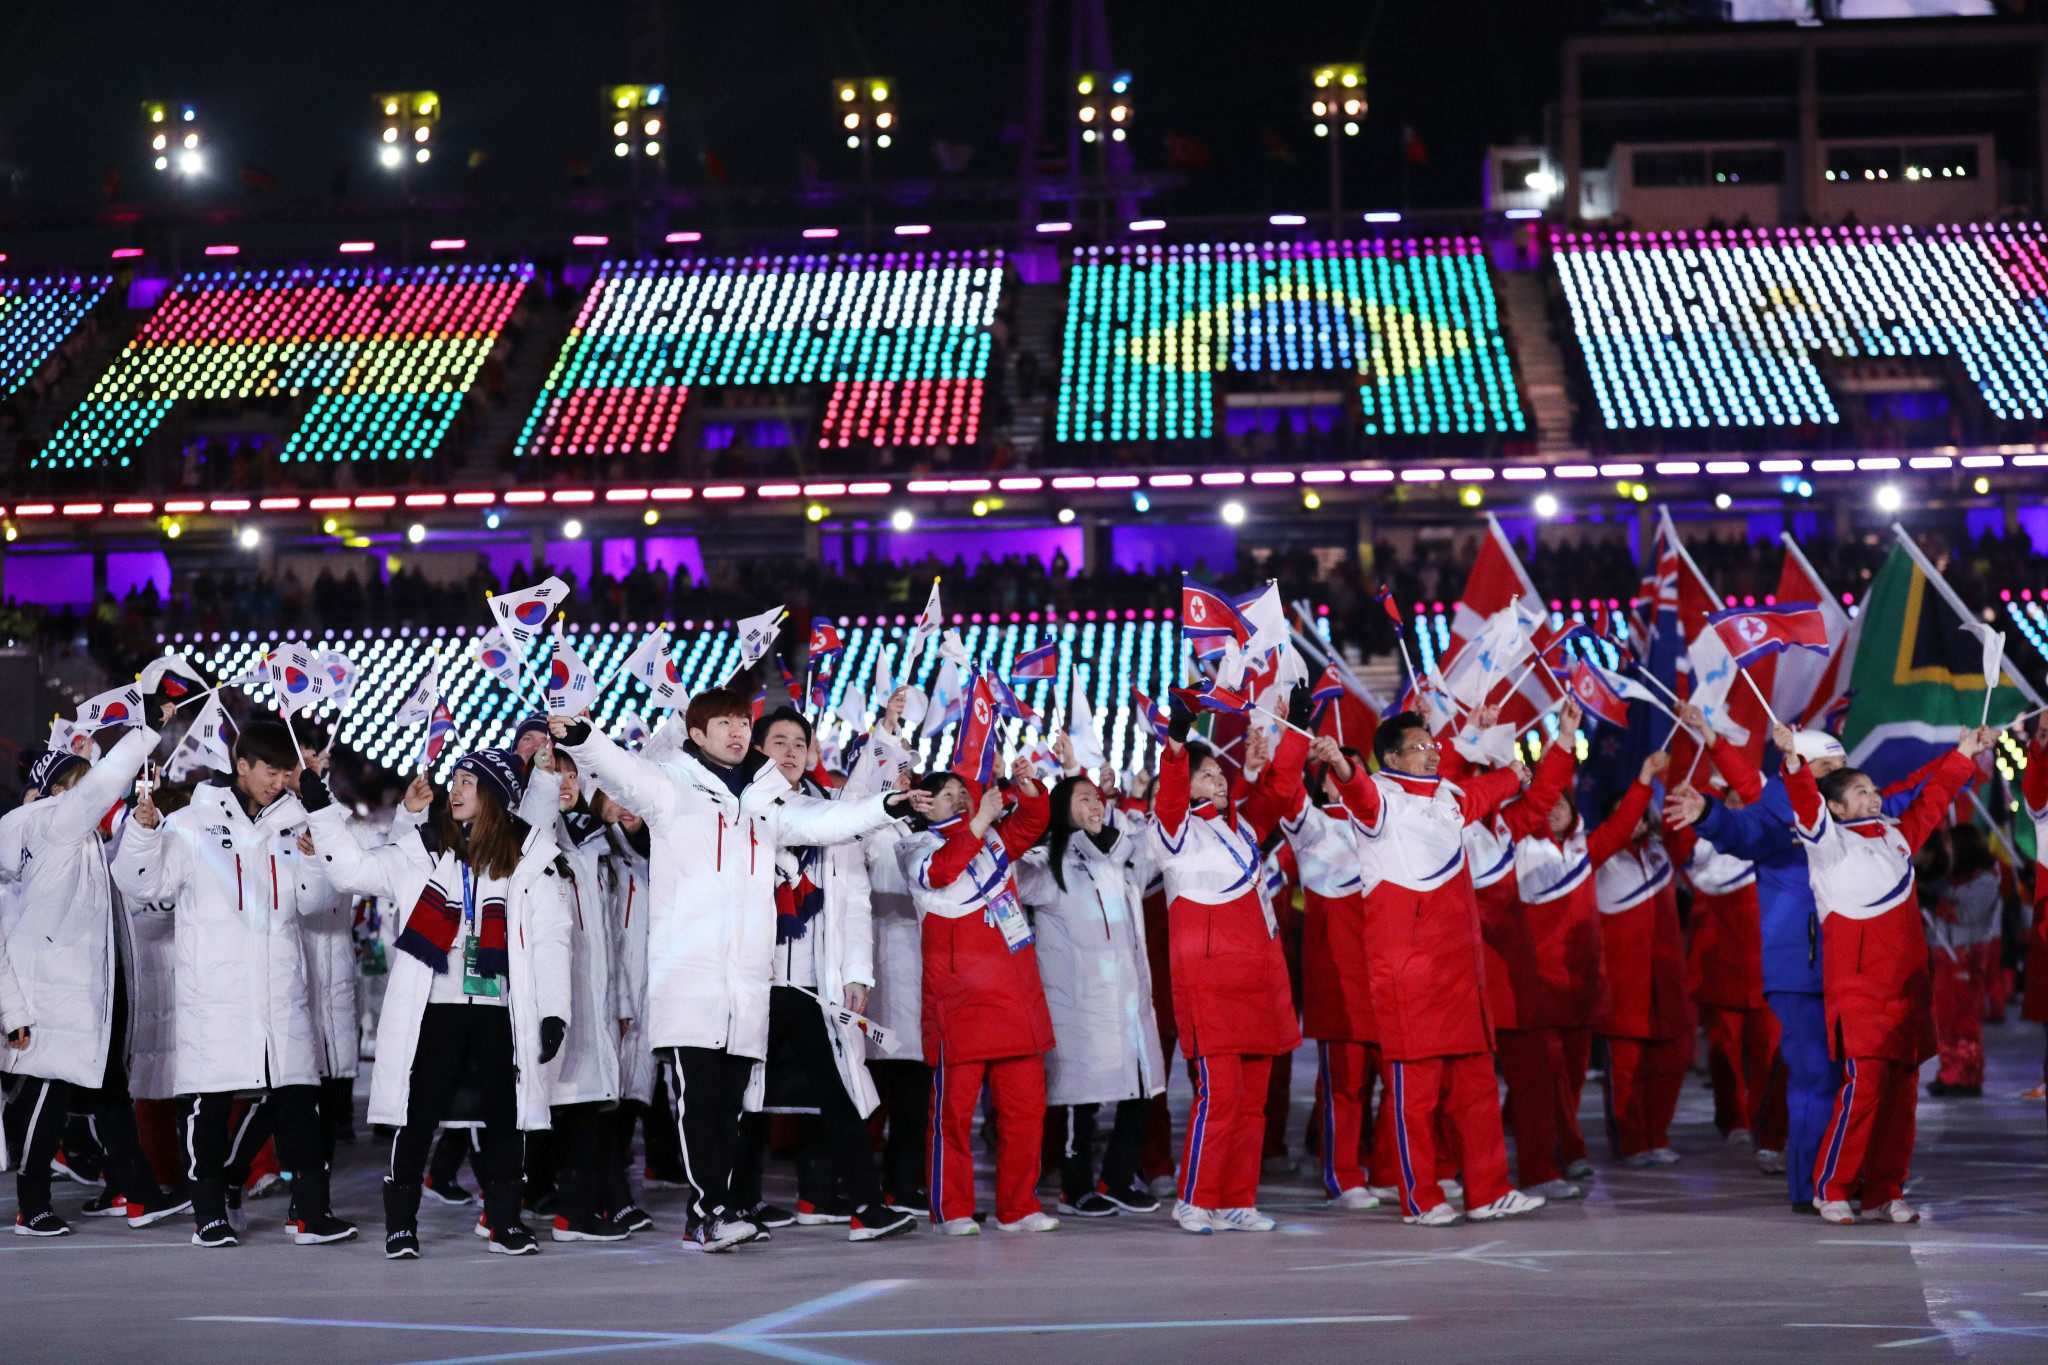 North and South Korean athletes marching together at the Closing Ceremony of Pyeongchang 2018 ©Getty Images